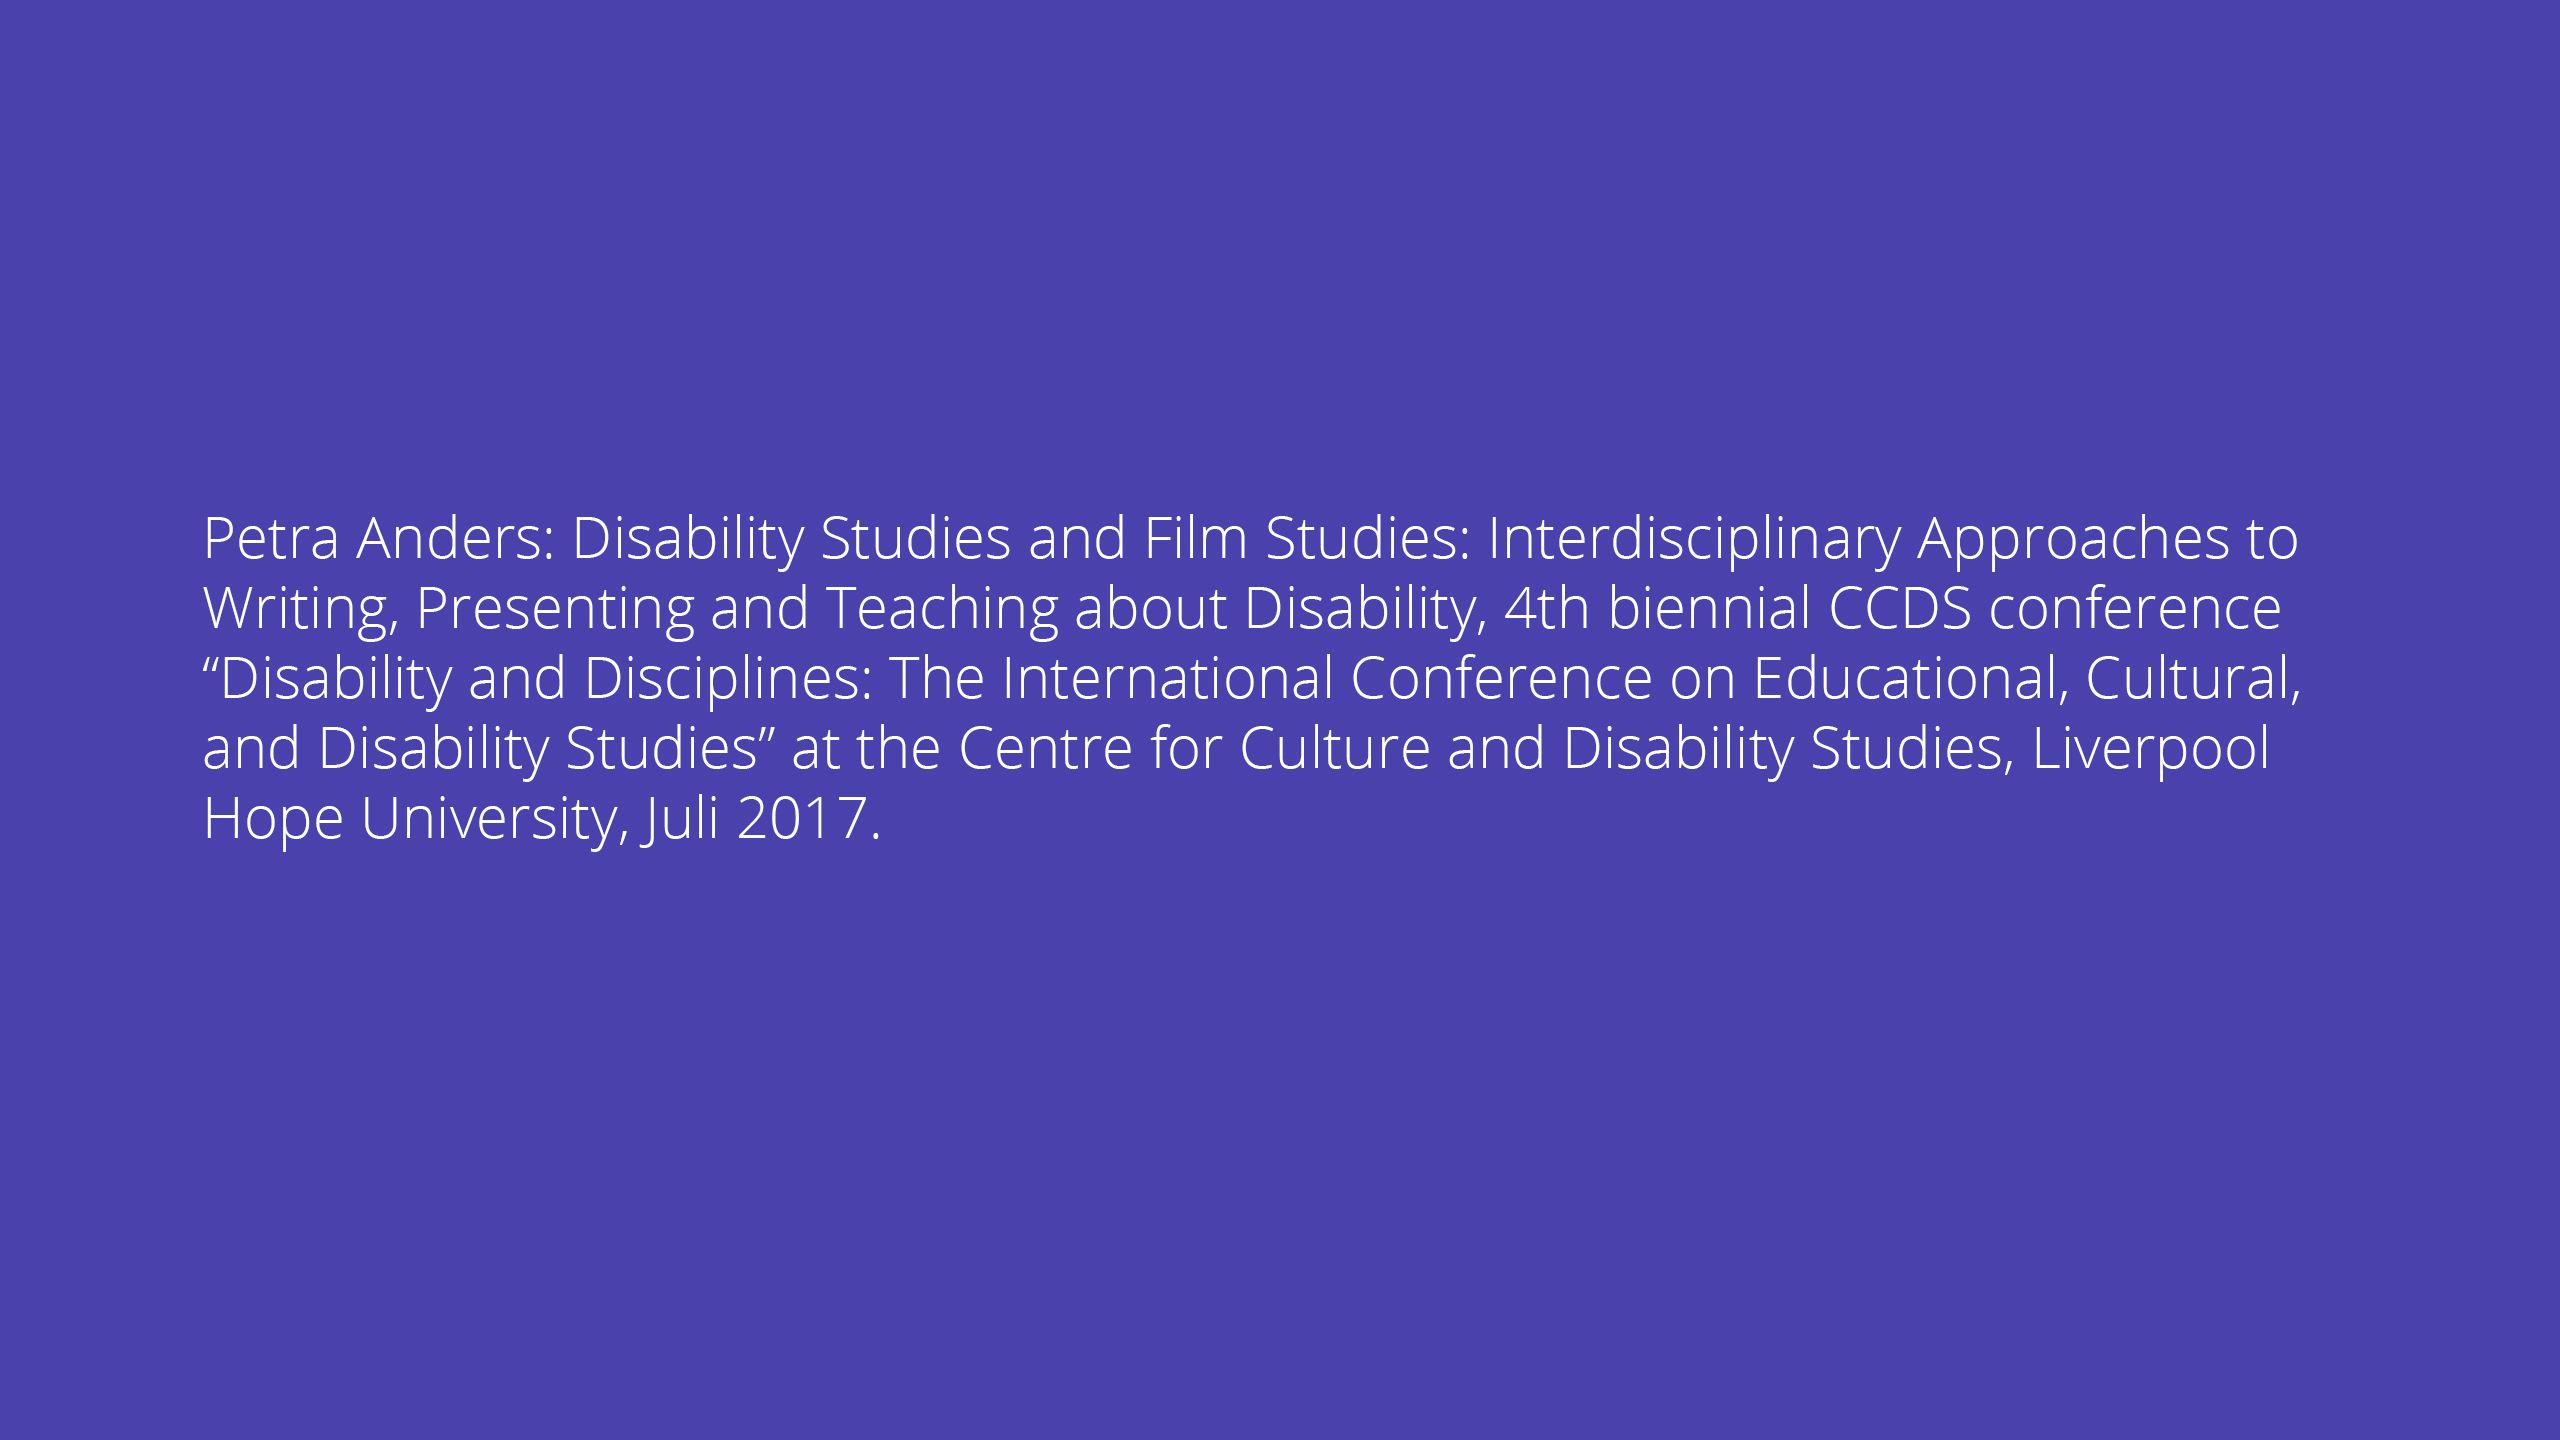 Petra Anders: Disability Studies and Film Studies: Interdisciplinary Approaches to Writing, Presenting and Teaching about Disability